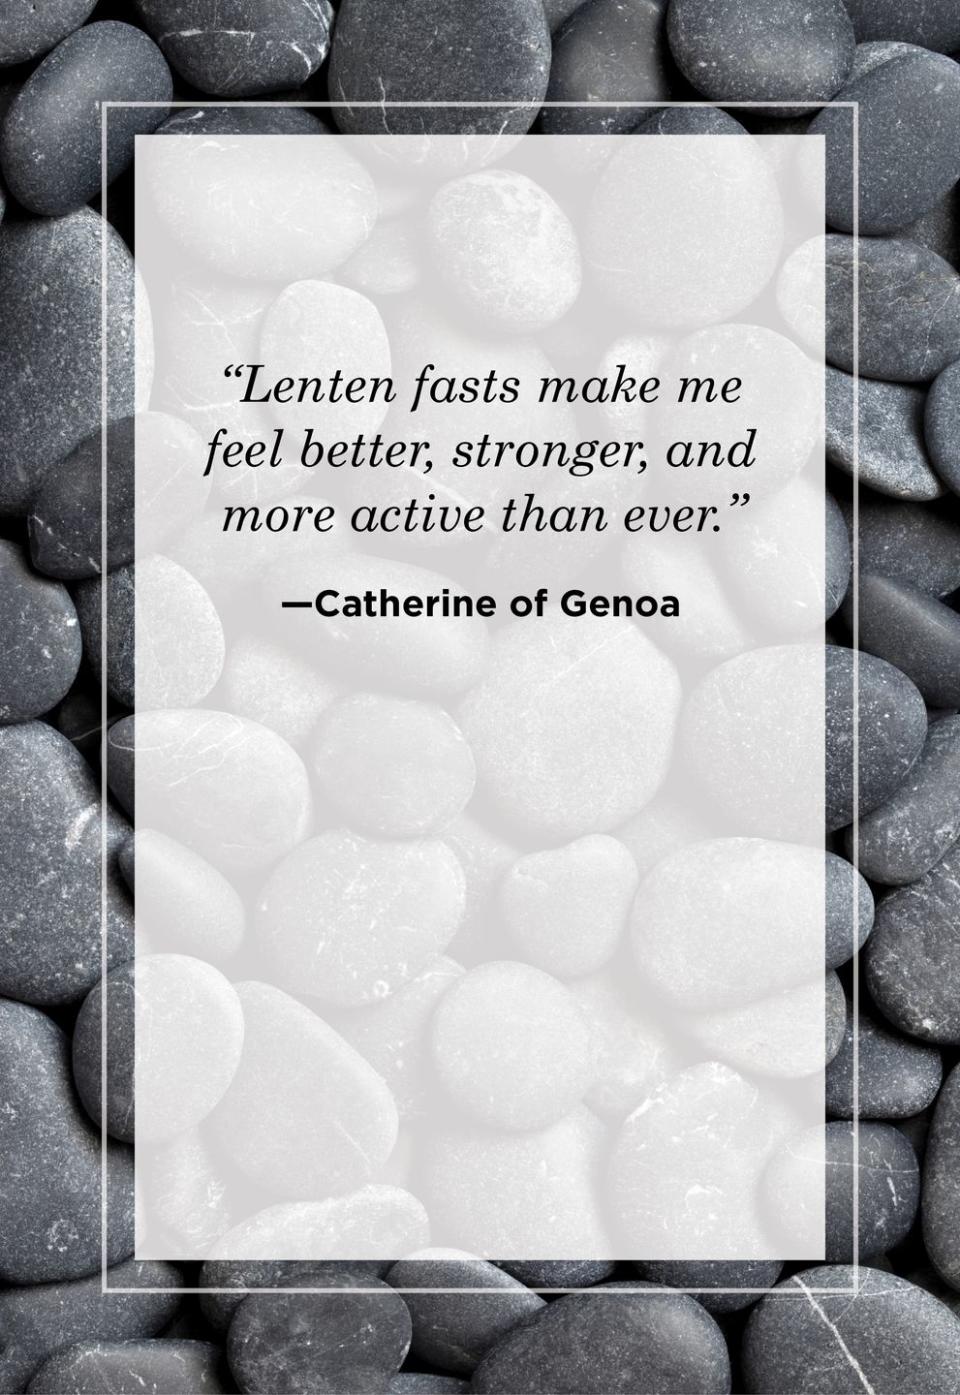 <p>"Lenten fasts make me feel better, stronger, and more active than ever."</p>